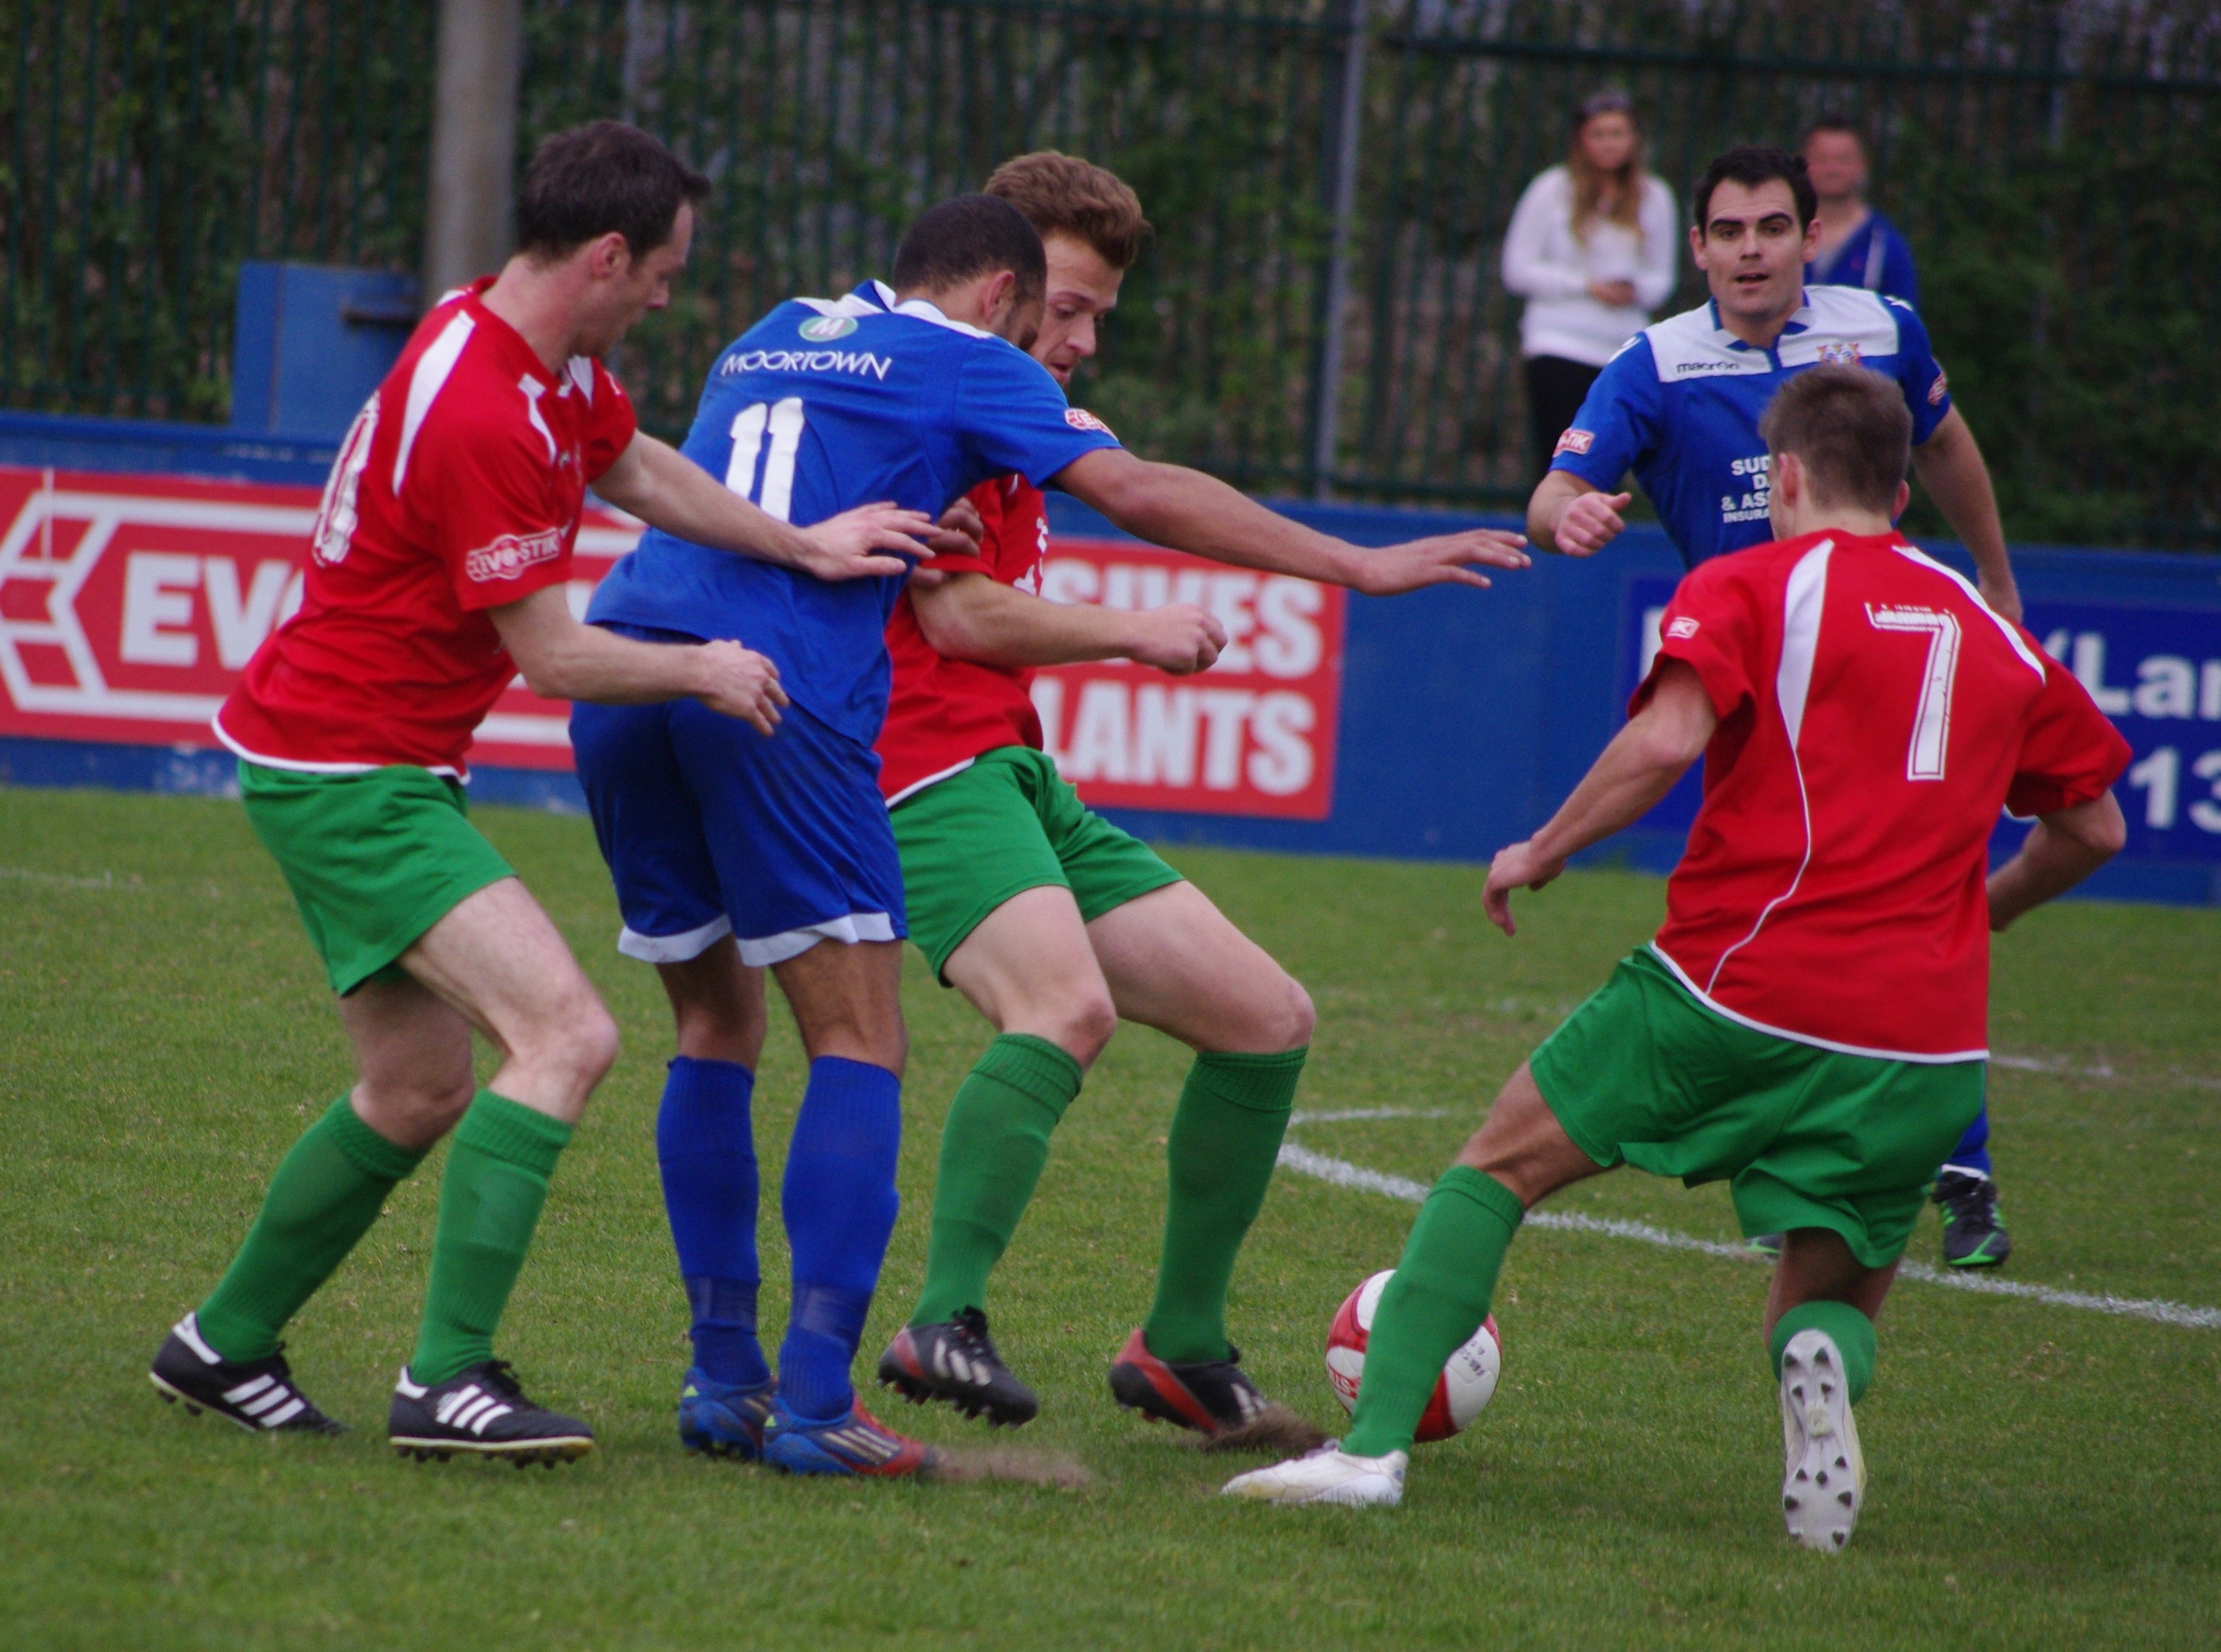 No way through: Matty James is surrounded by three Harrogate Railway players